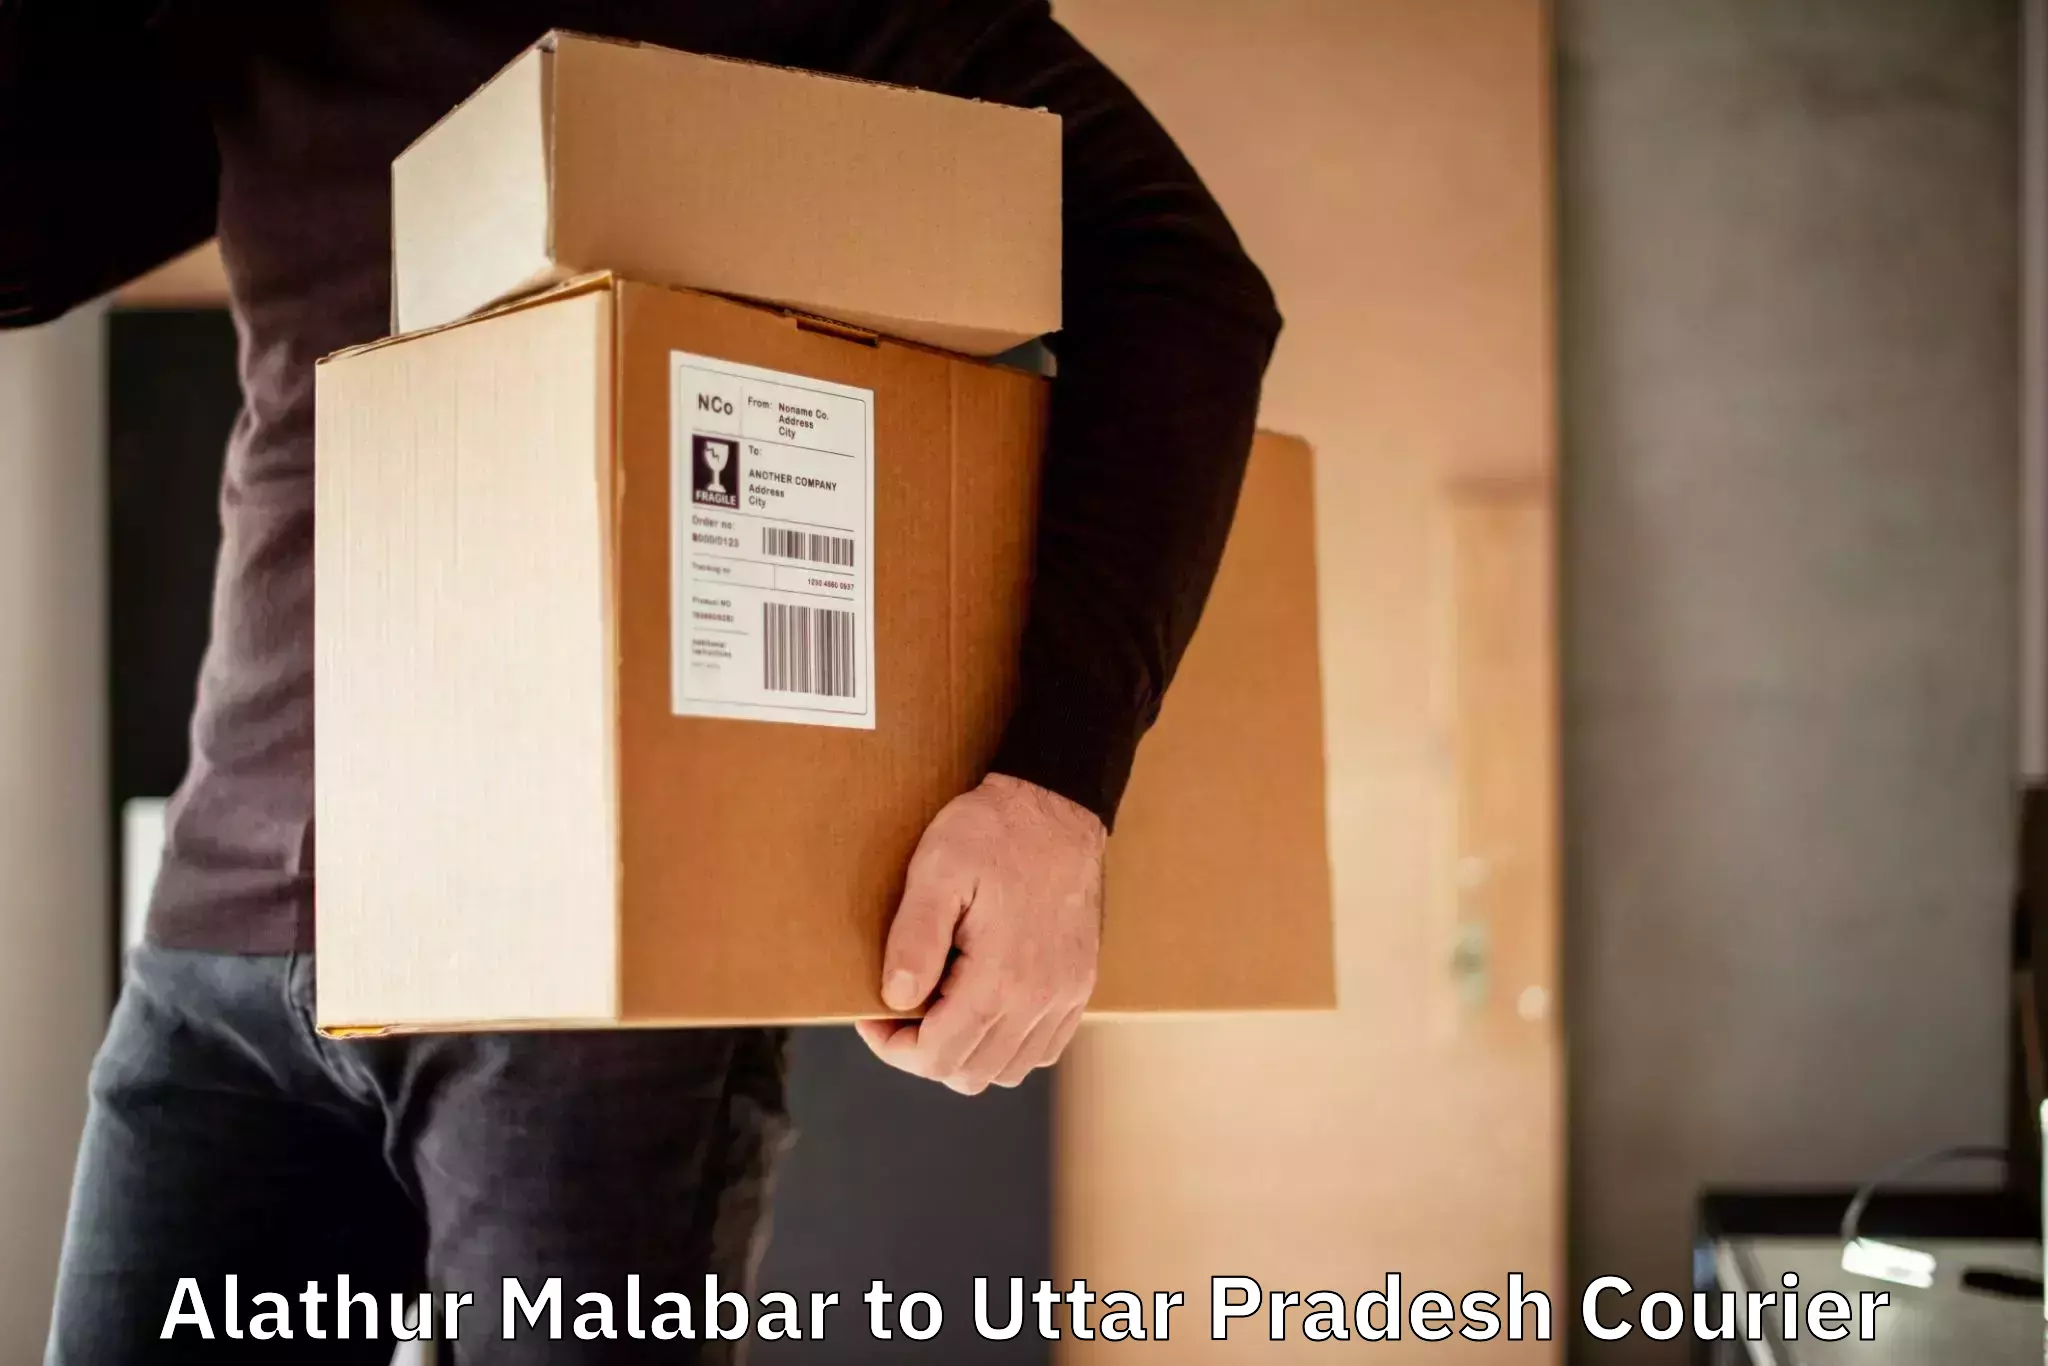 Same-day delivery solutions Alathur Malabar to Kirauli